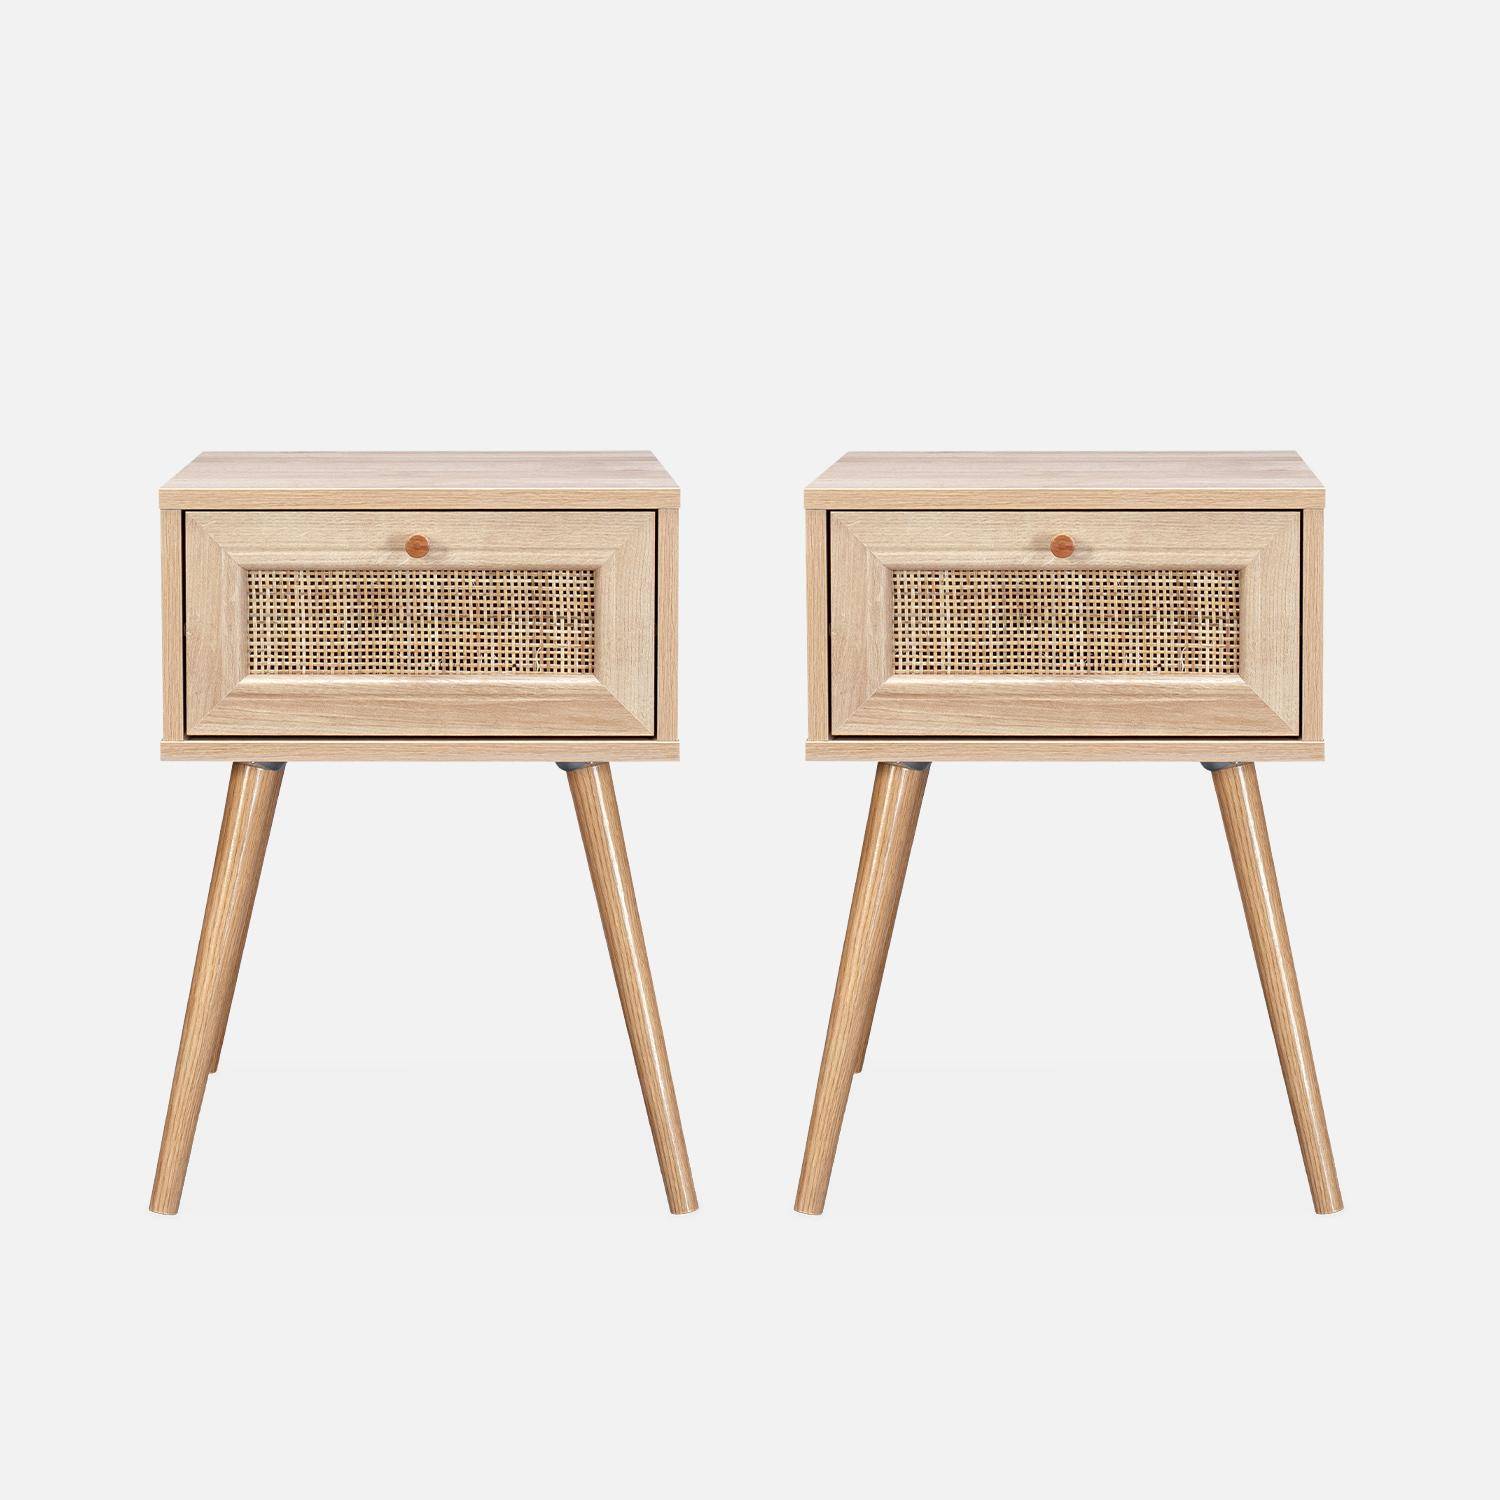 Pair of woven rattan bedside tables with drawer, 39x39x55.4cm - Boheme - Natural Wood colour,sweeek,Photo4